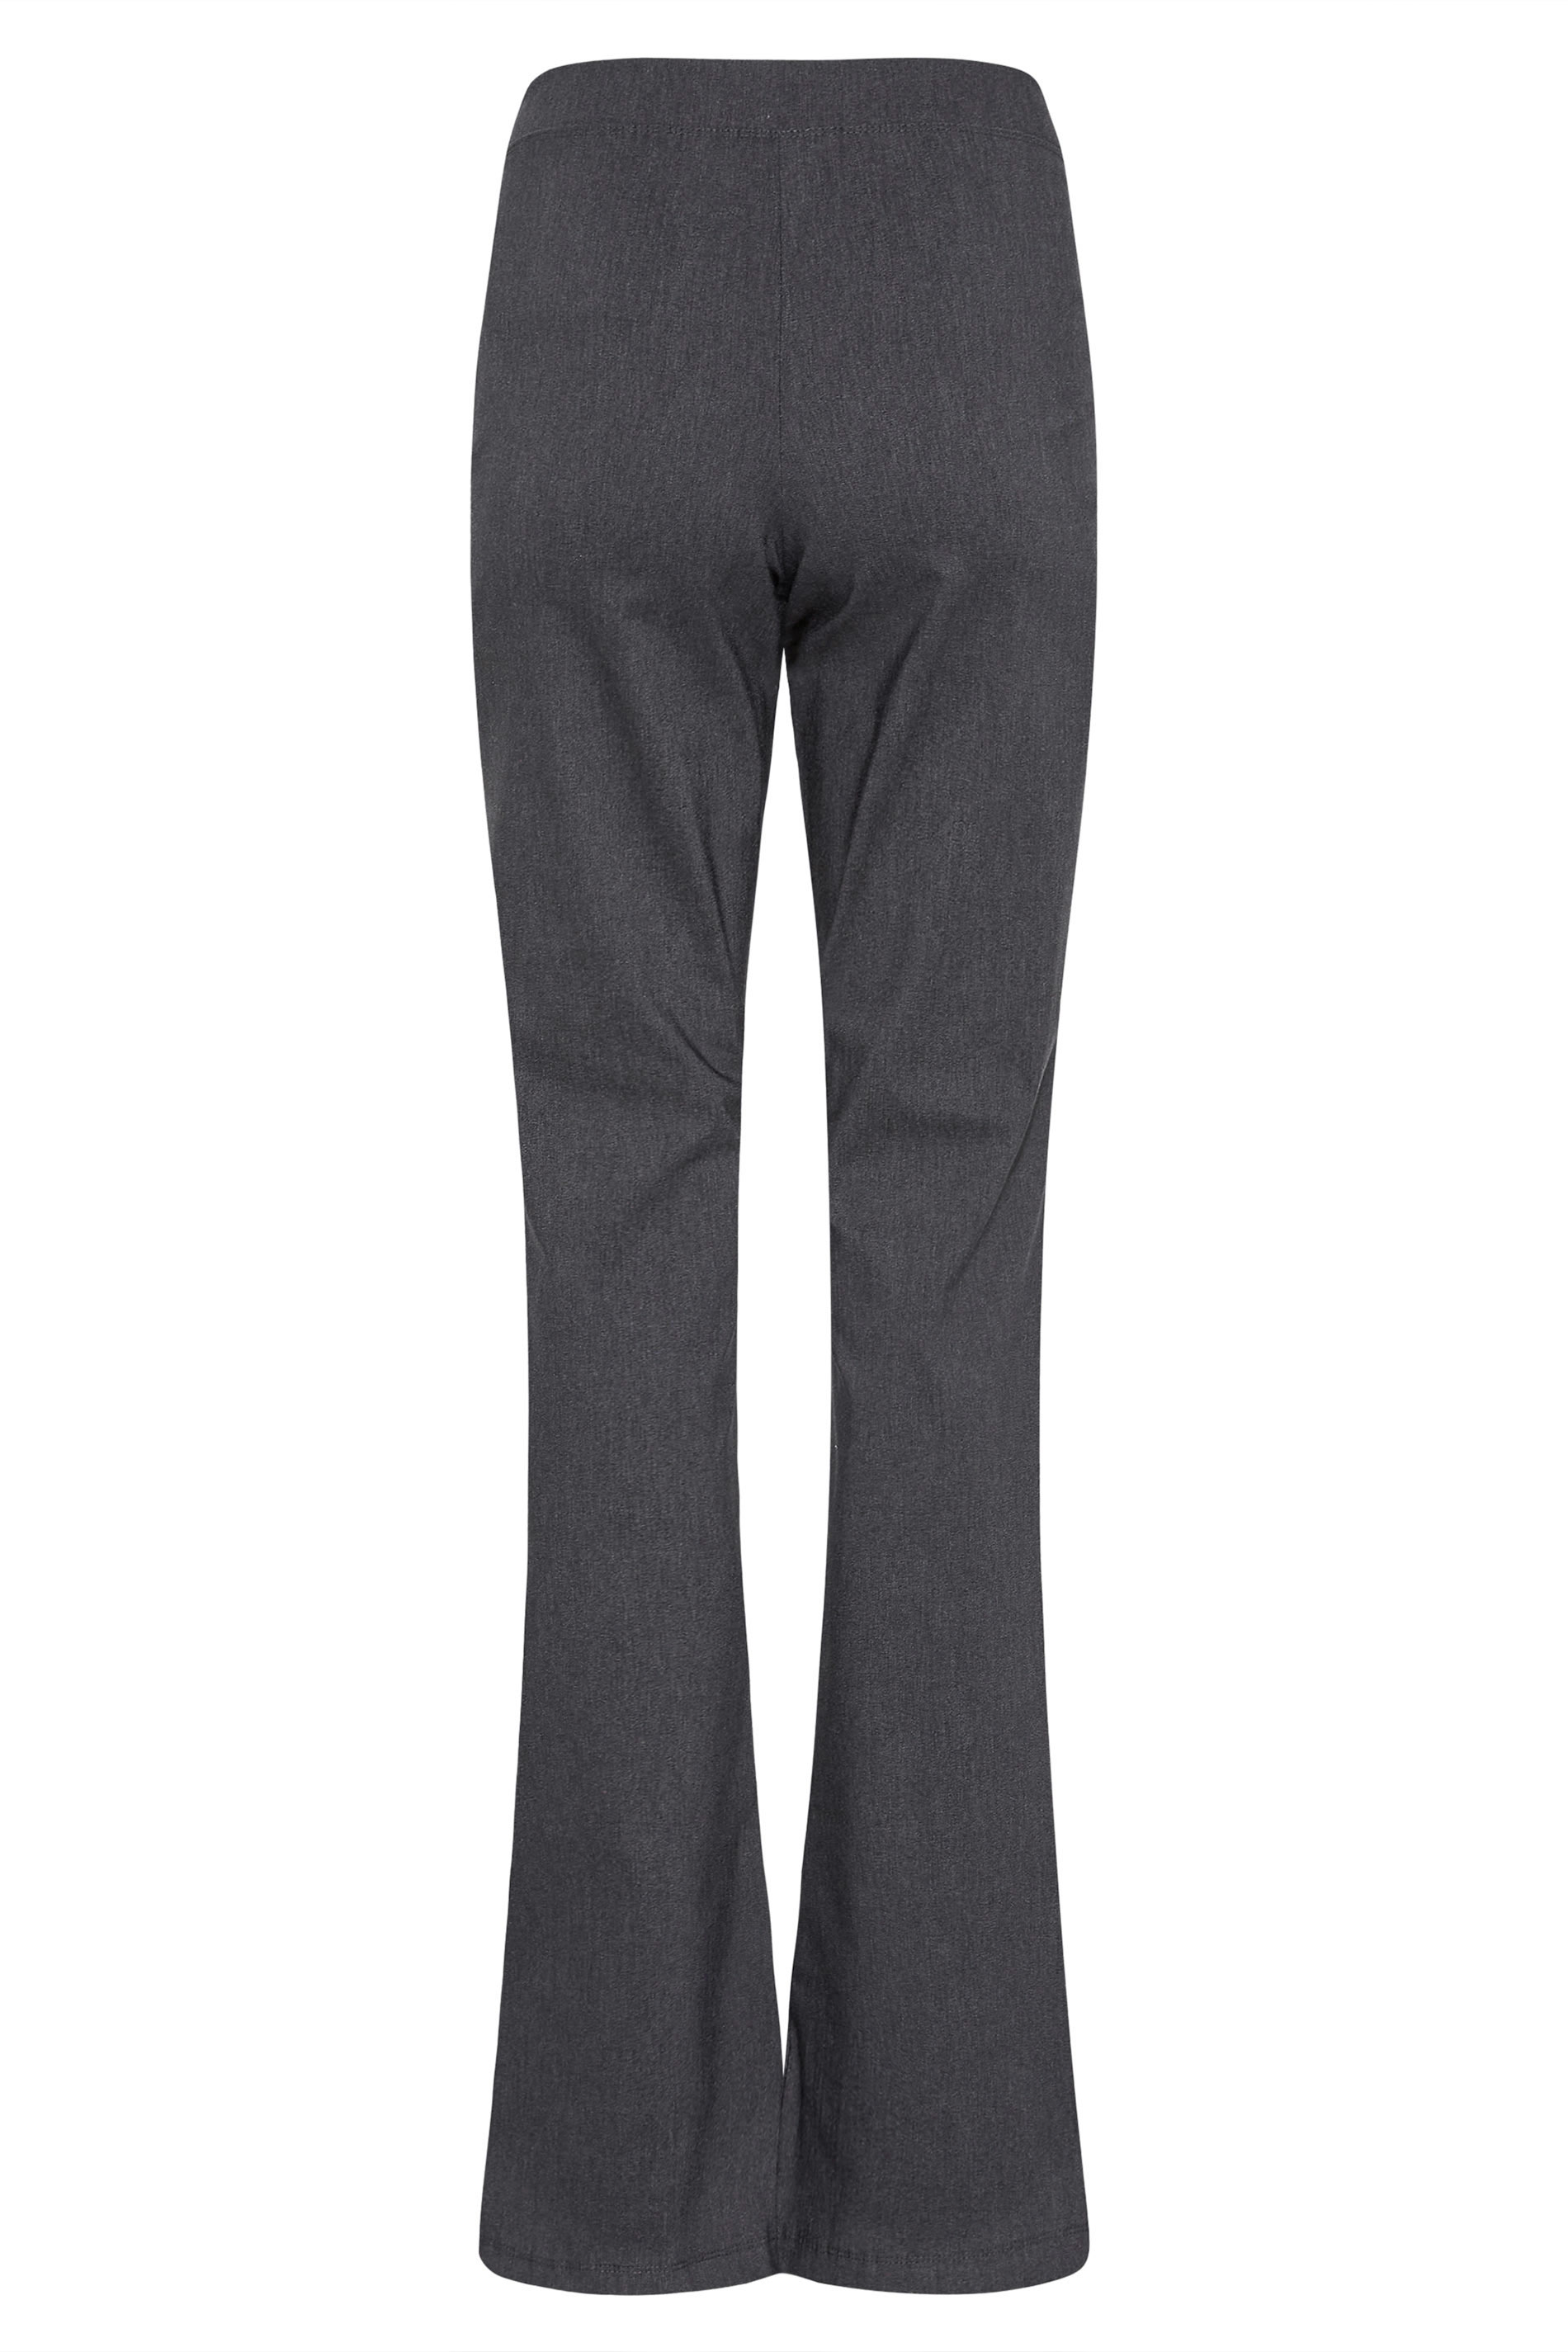 Tall Women's LTS Charcoal Grey Stretch Bootcut Trousers | Long Tall Sally